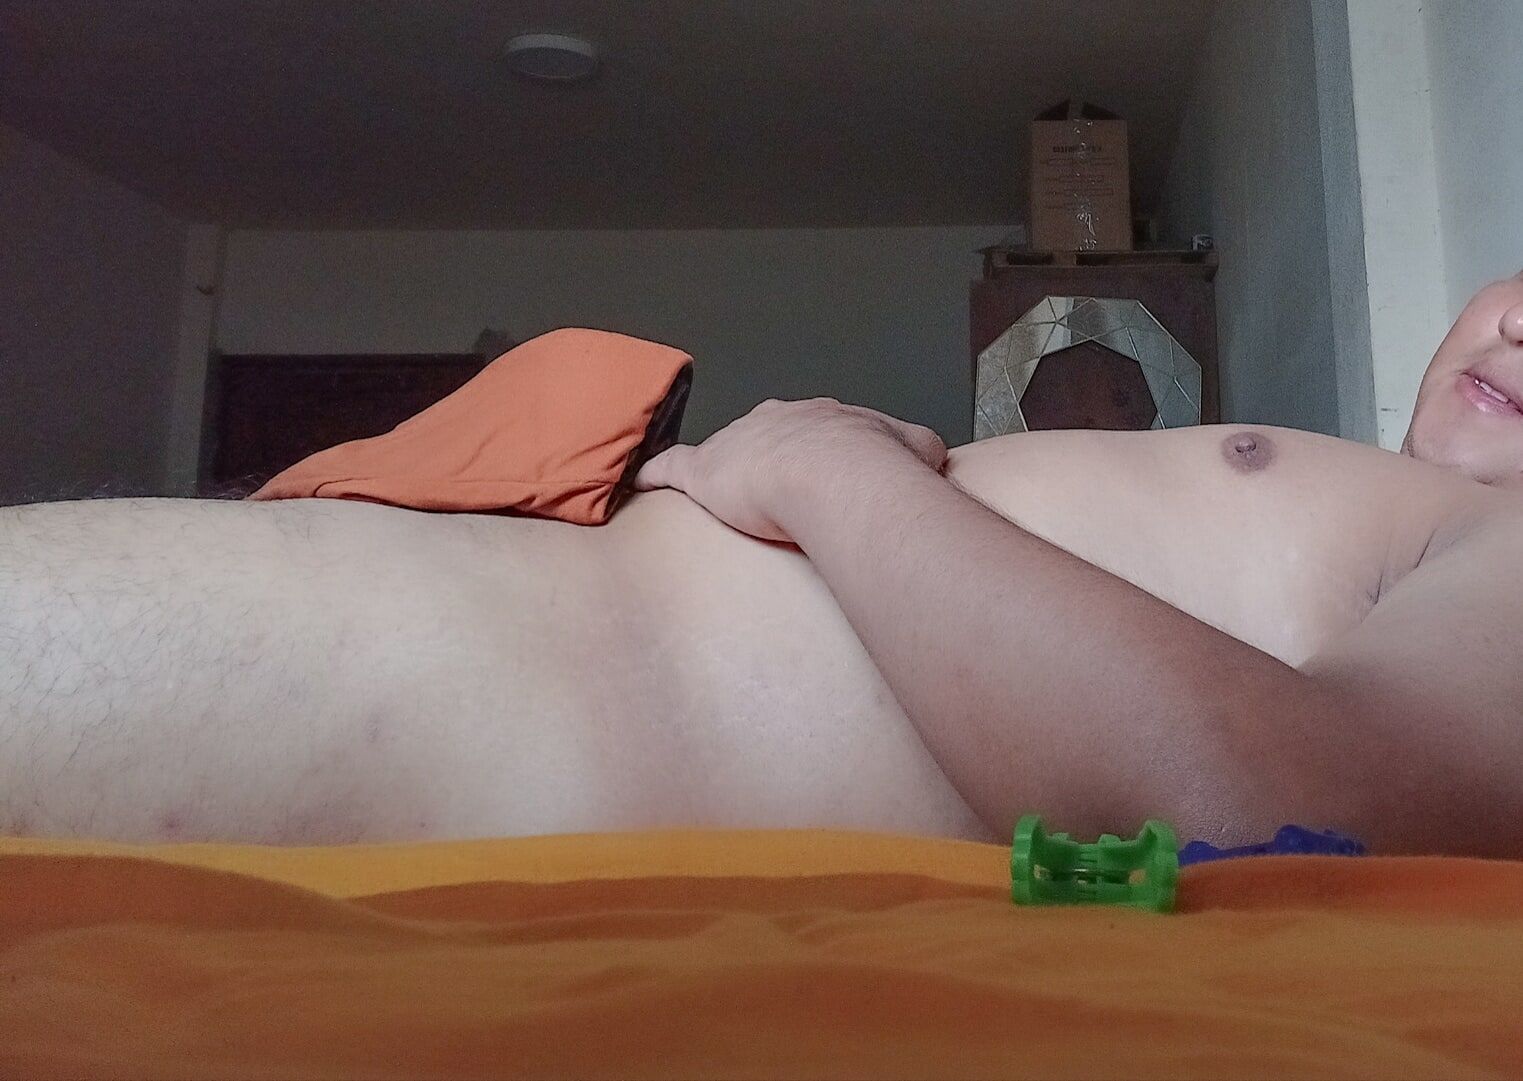 Me lying down and my penis standing - 02 (SemiNude but Nake) #6